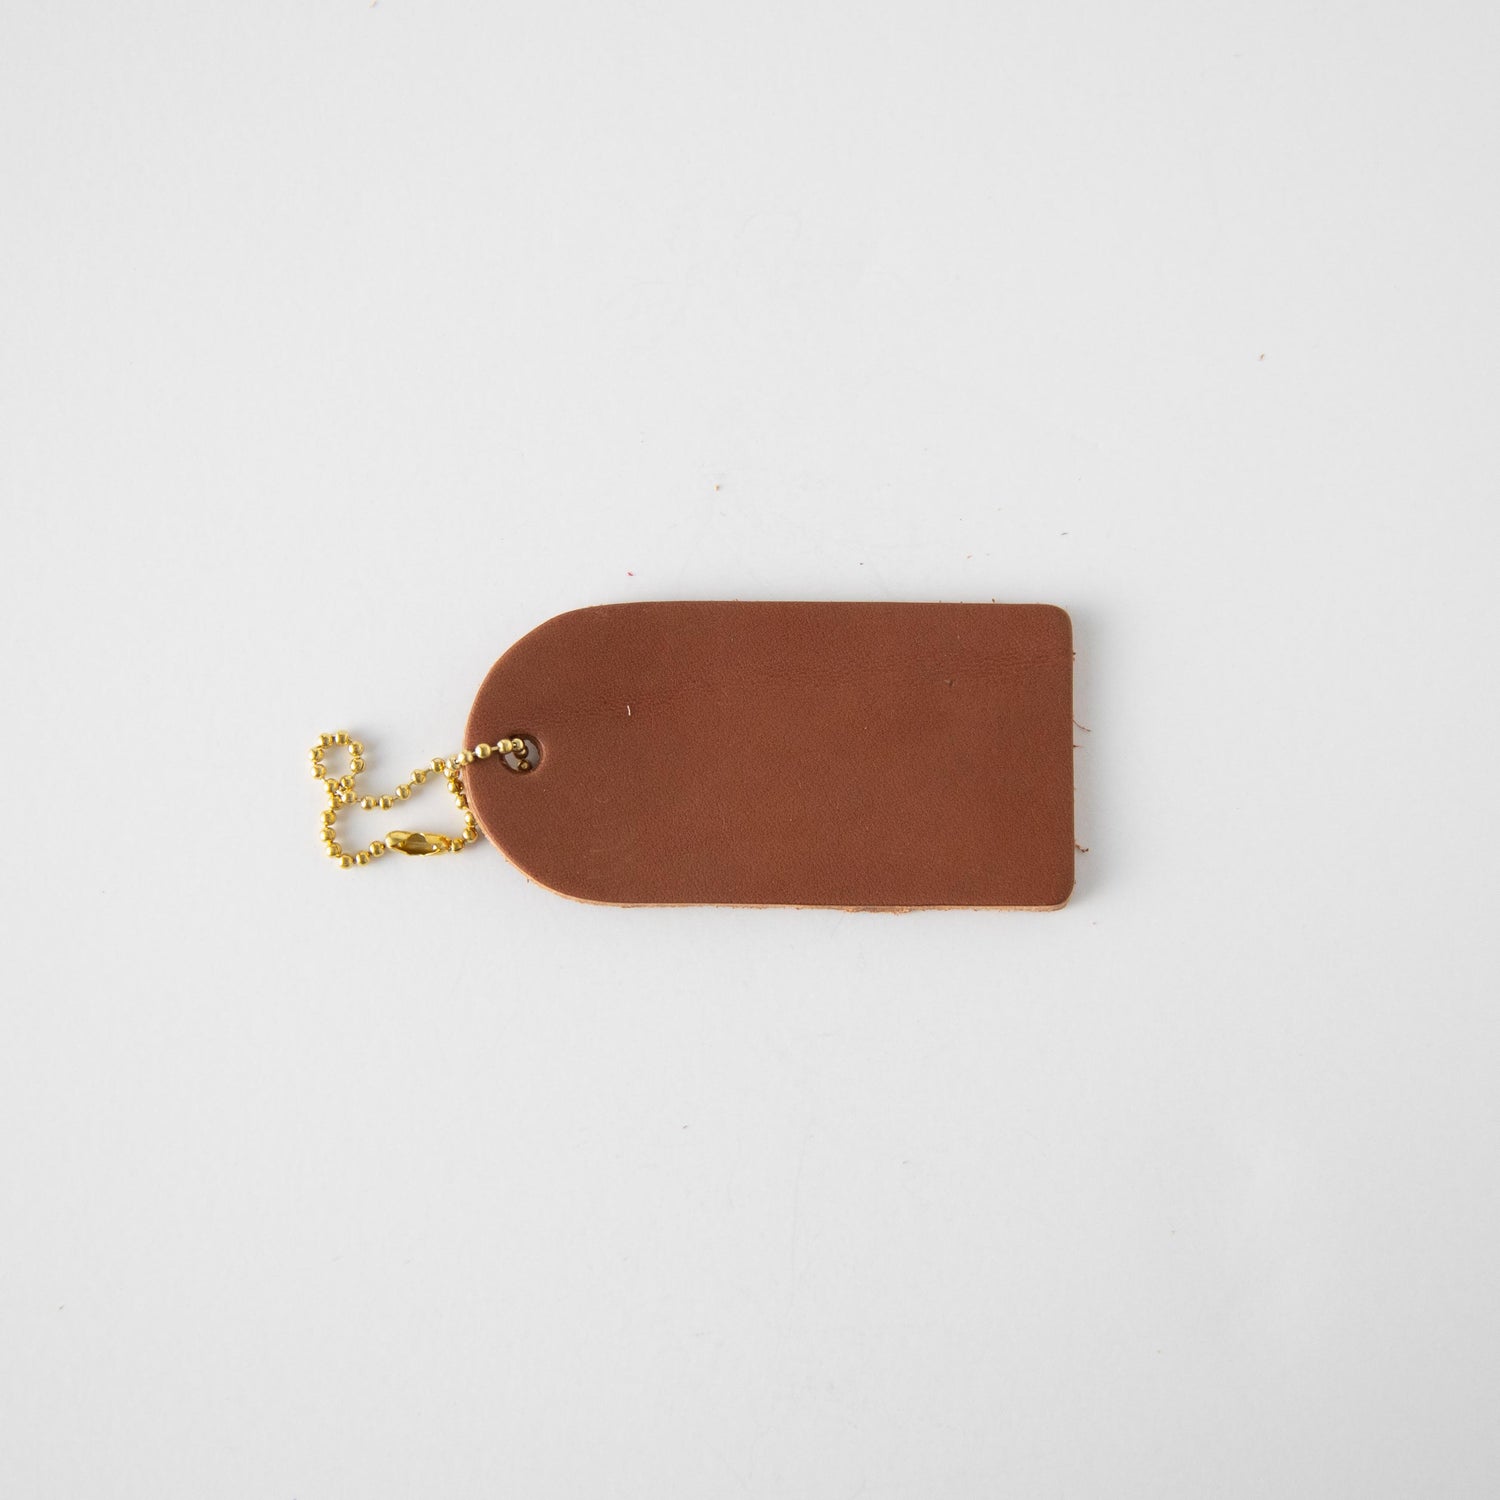 Personalized Leather Pouch. Custom Leather Pouch. Handmade.